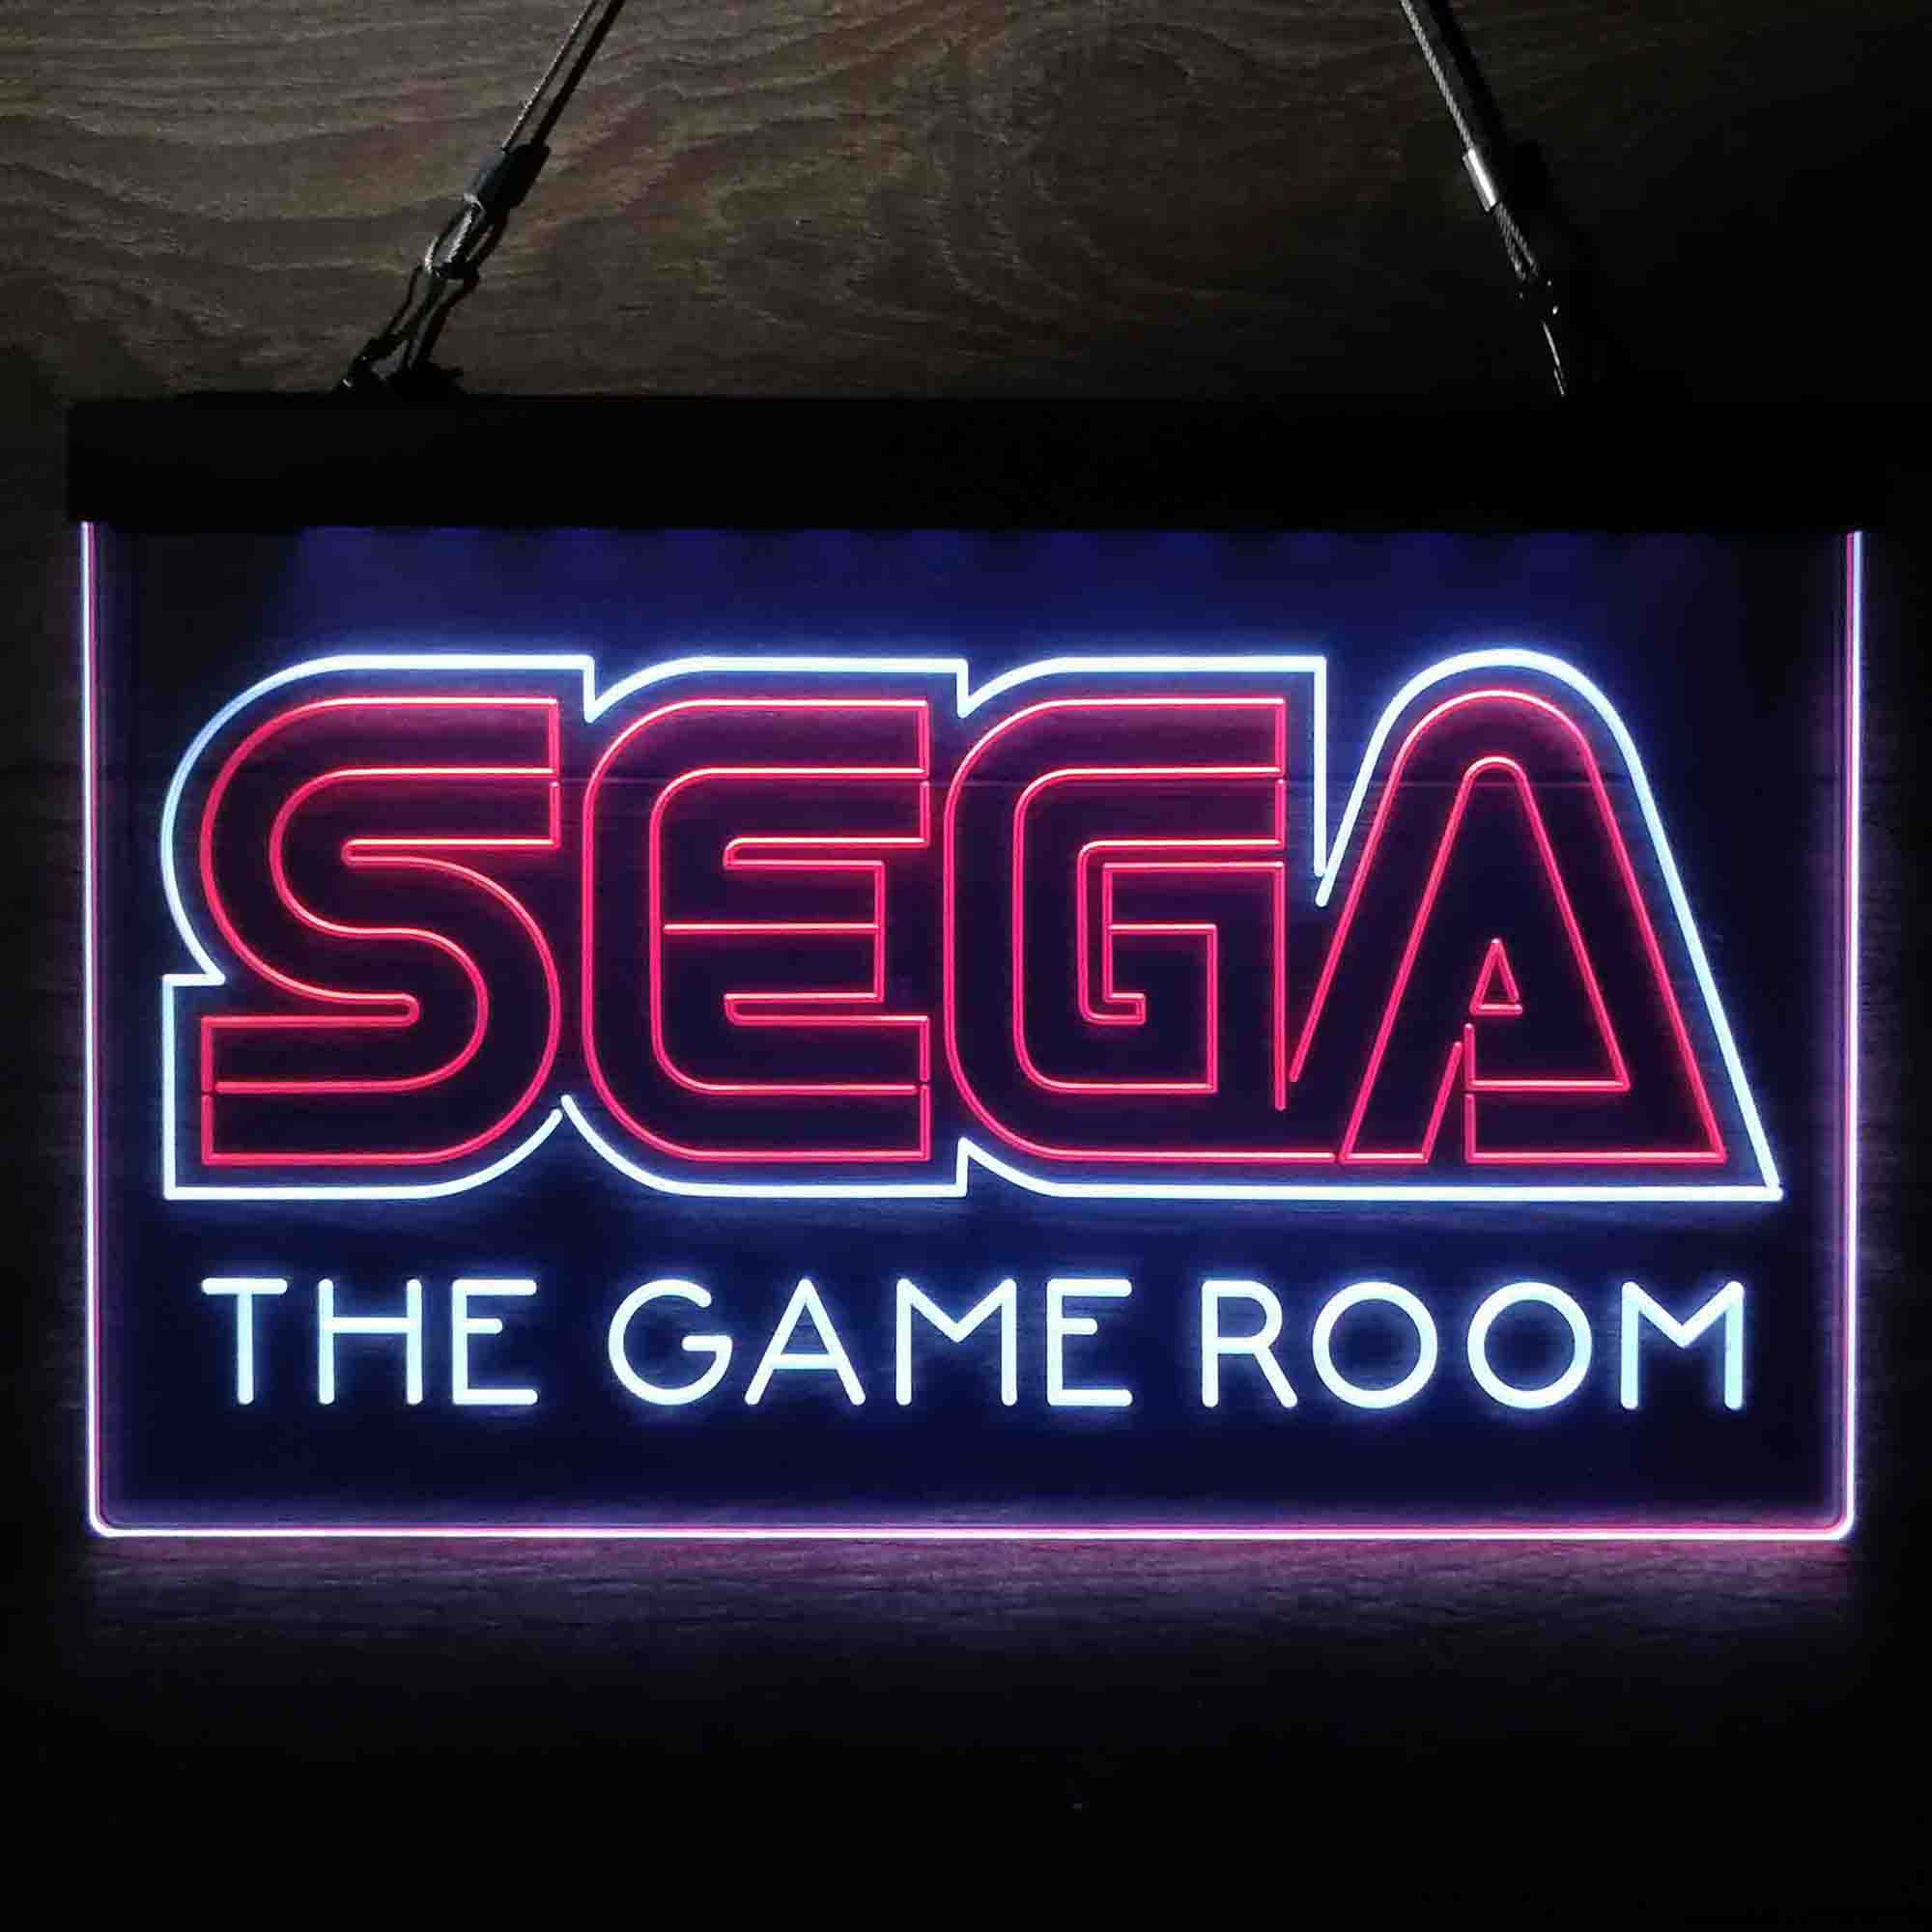 Sega Custom Personalized Game Room Neon-Like LED Sign - Father's Day Gift